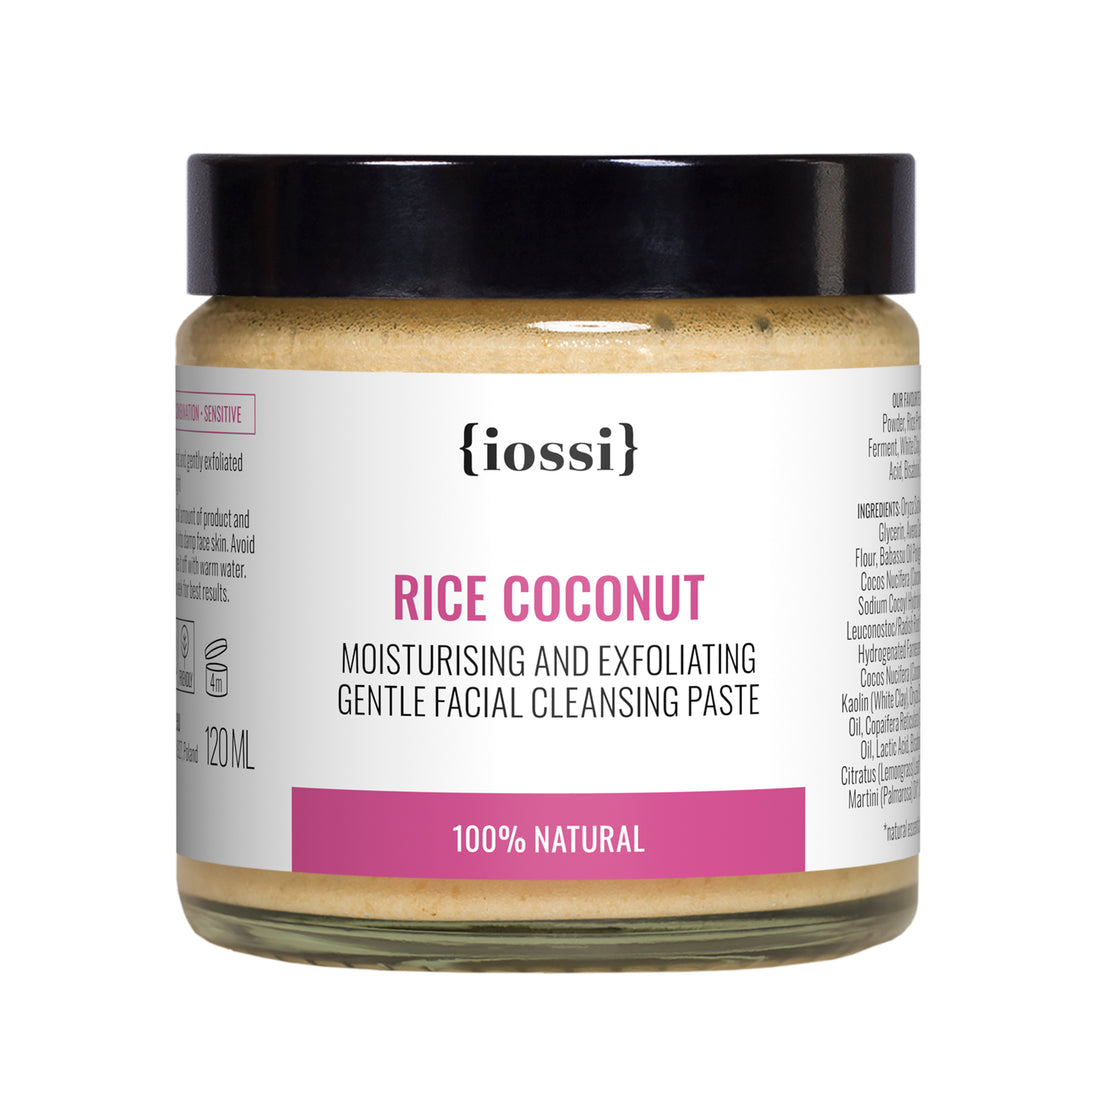 Rice Coconut. Moisturising and Exfoliating Facial Cleansing Paste